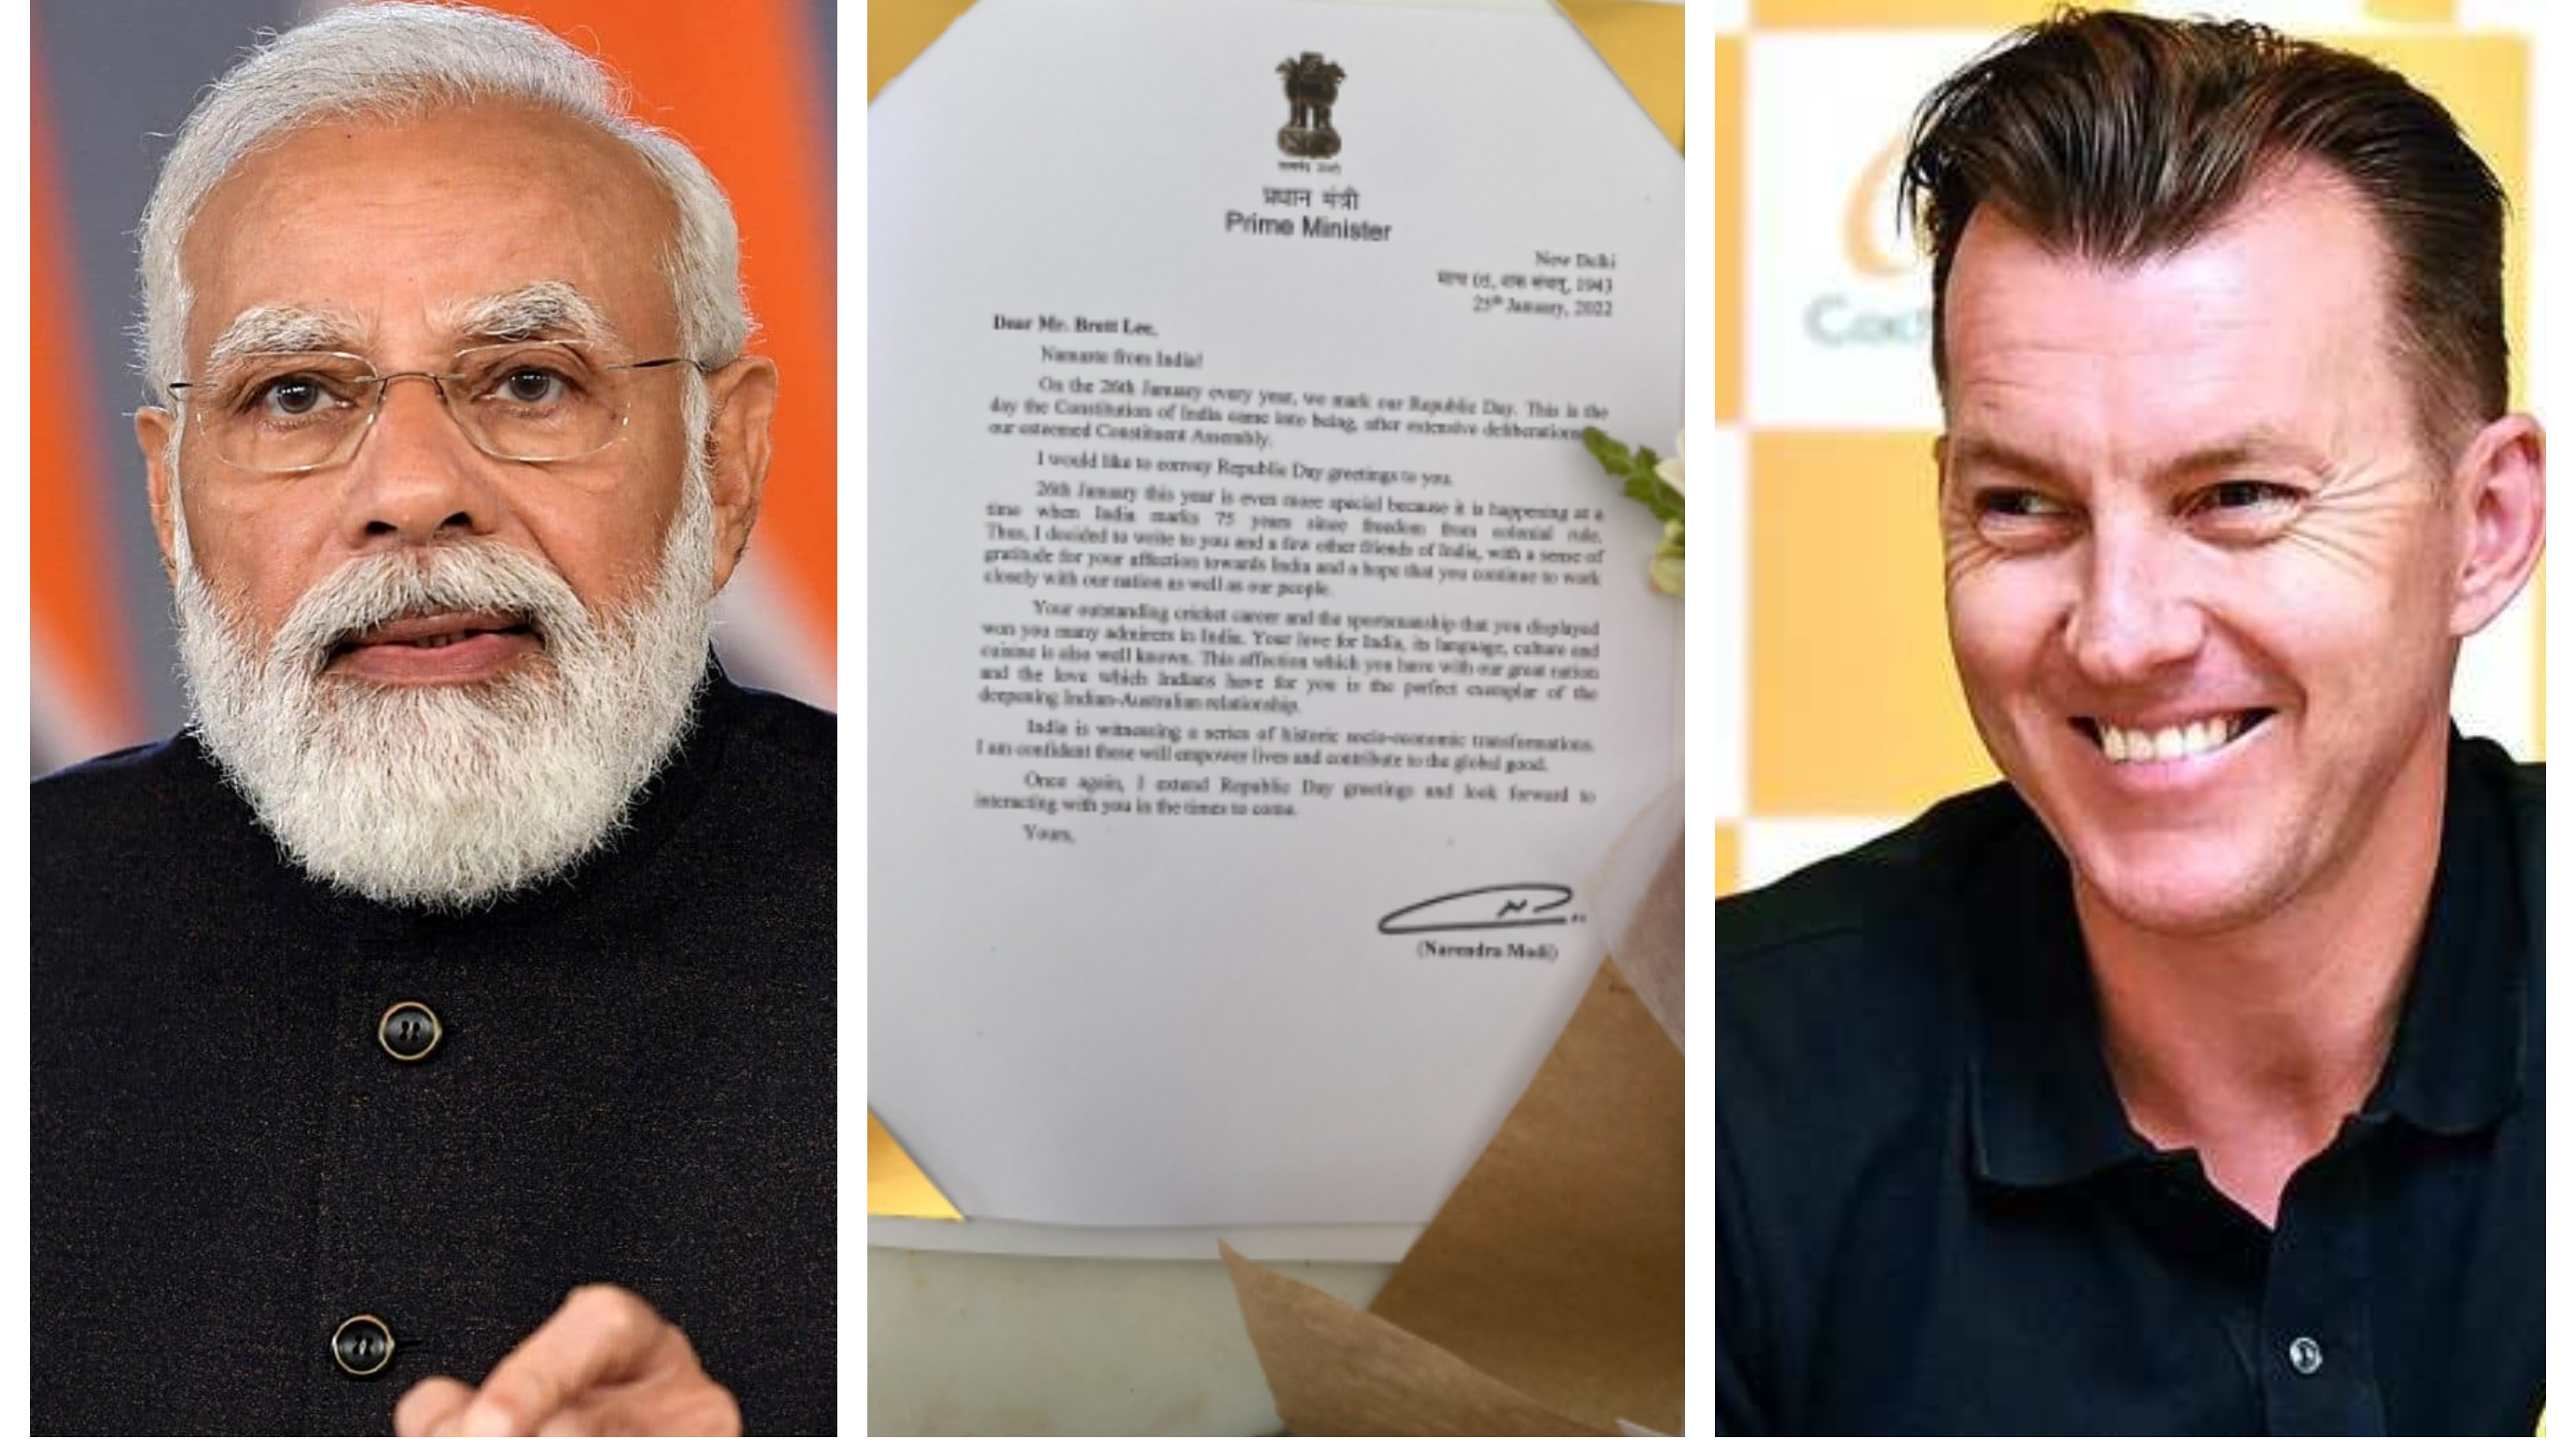 Brett Lee honoured to receive personalized letter from PM Narendra Modi on India’s 73rd Republic Day